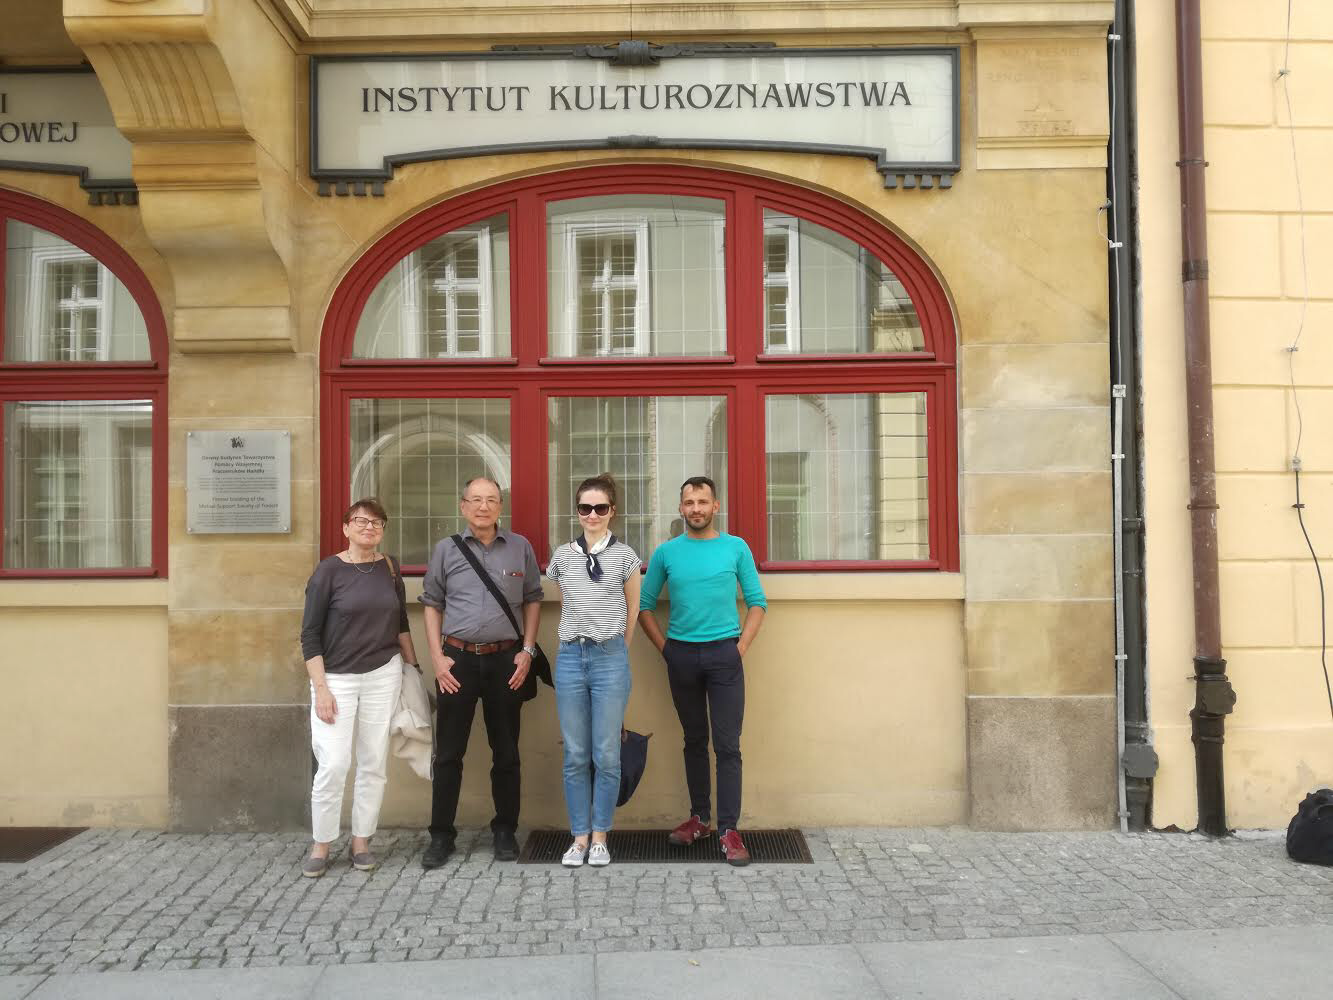 With (left to right) Dorota Wolska, Alexandra Kil, and Jacek Ma?czy?ski of the University of Wroclaw's Laboratory of Contemporary Humanities (in the Department of Cultural Studies